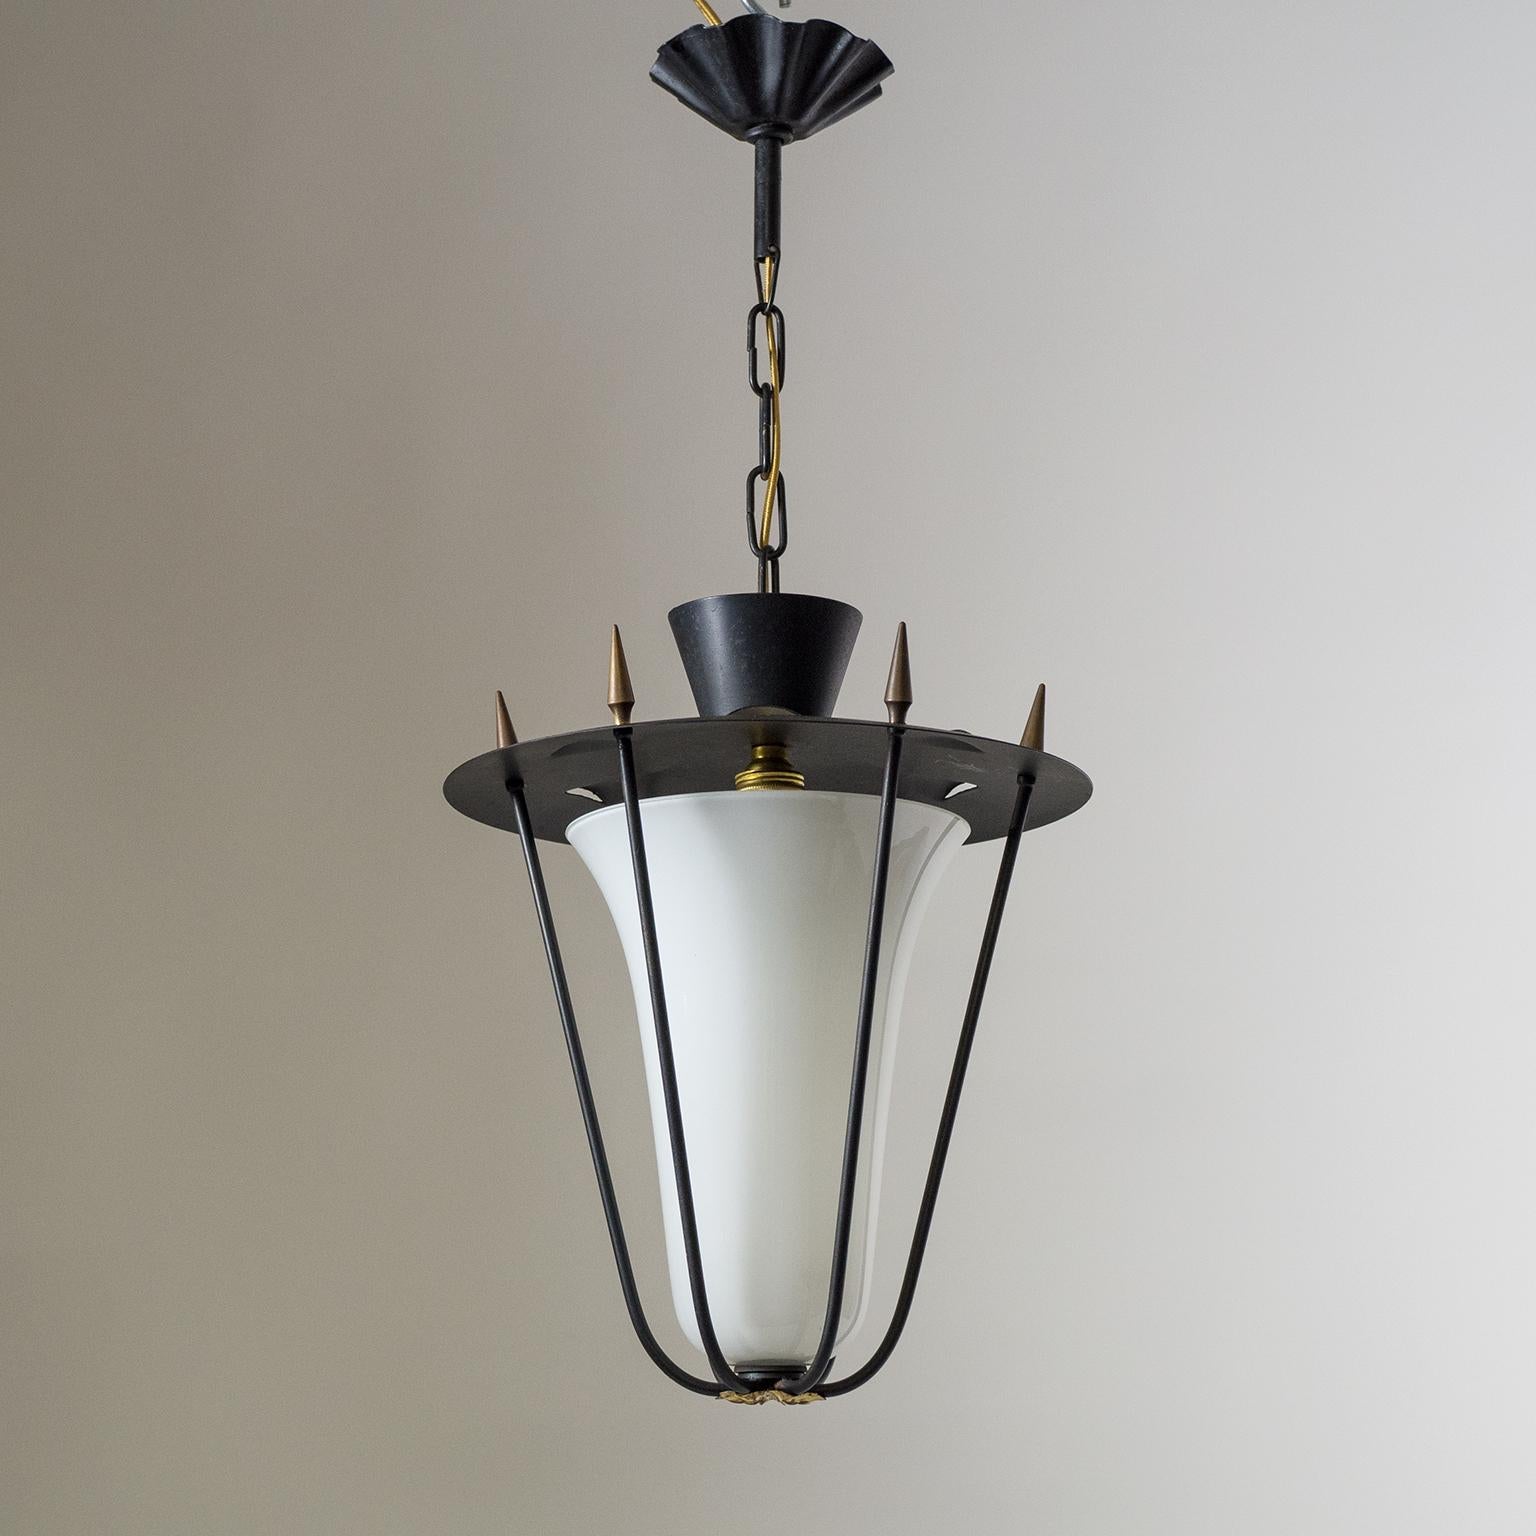 1950s French Lantern, Black and White with Brass Details 2